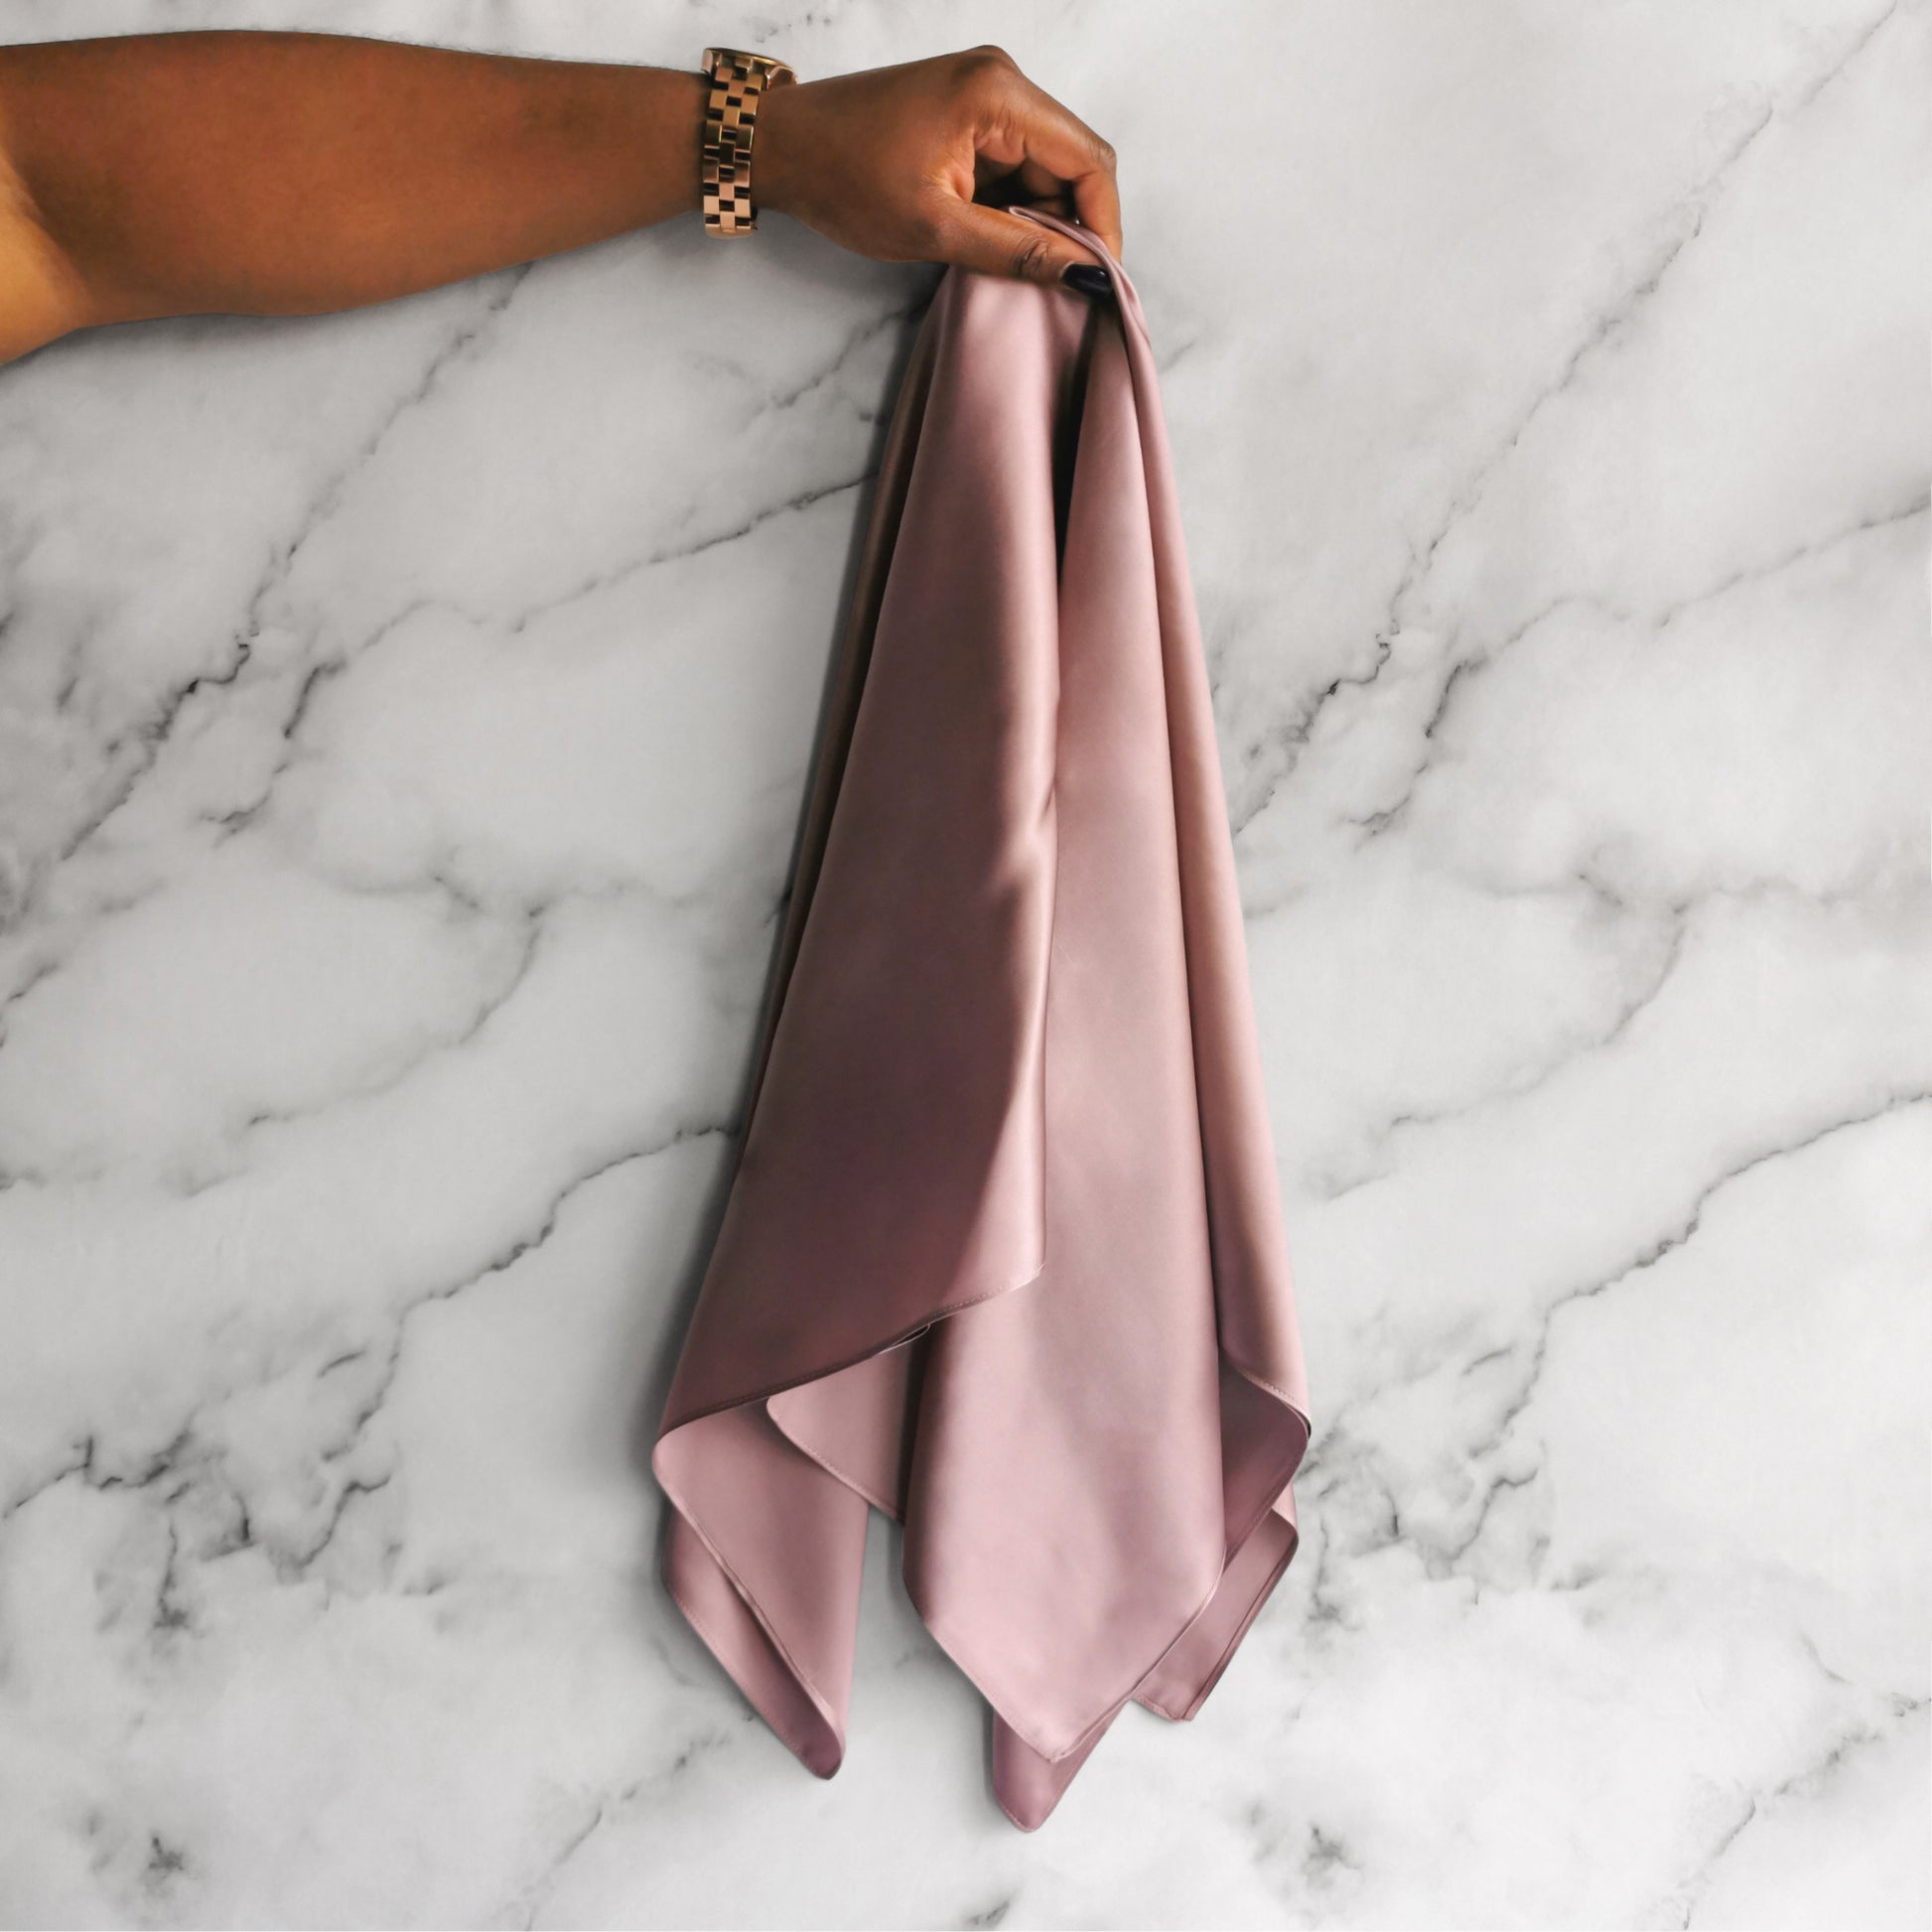 Neck scarf white satin various colors scarf neck tie women accessories gold  square scarf other colors available on demand